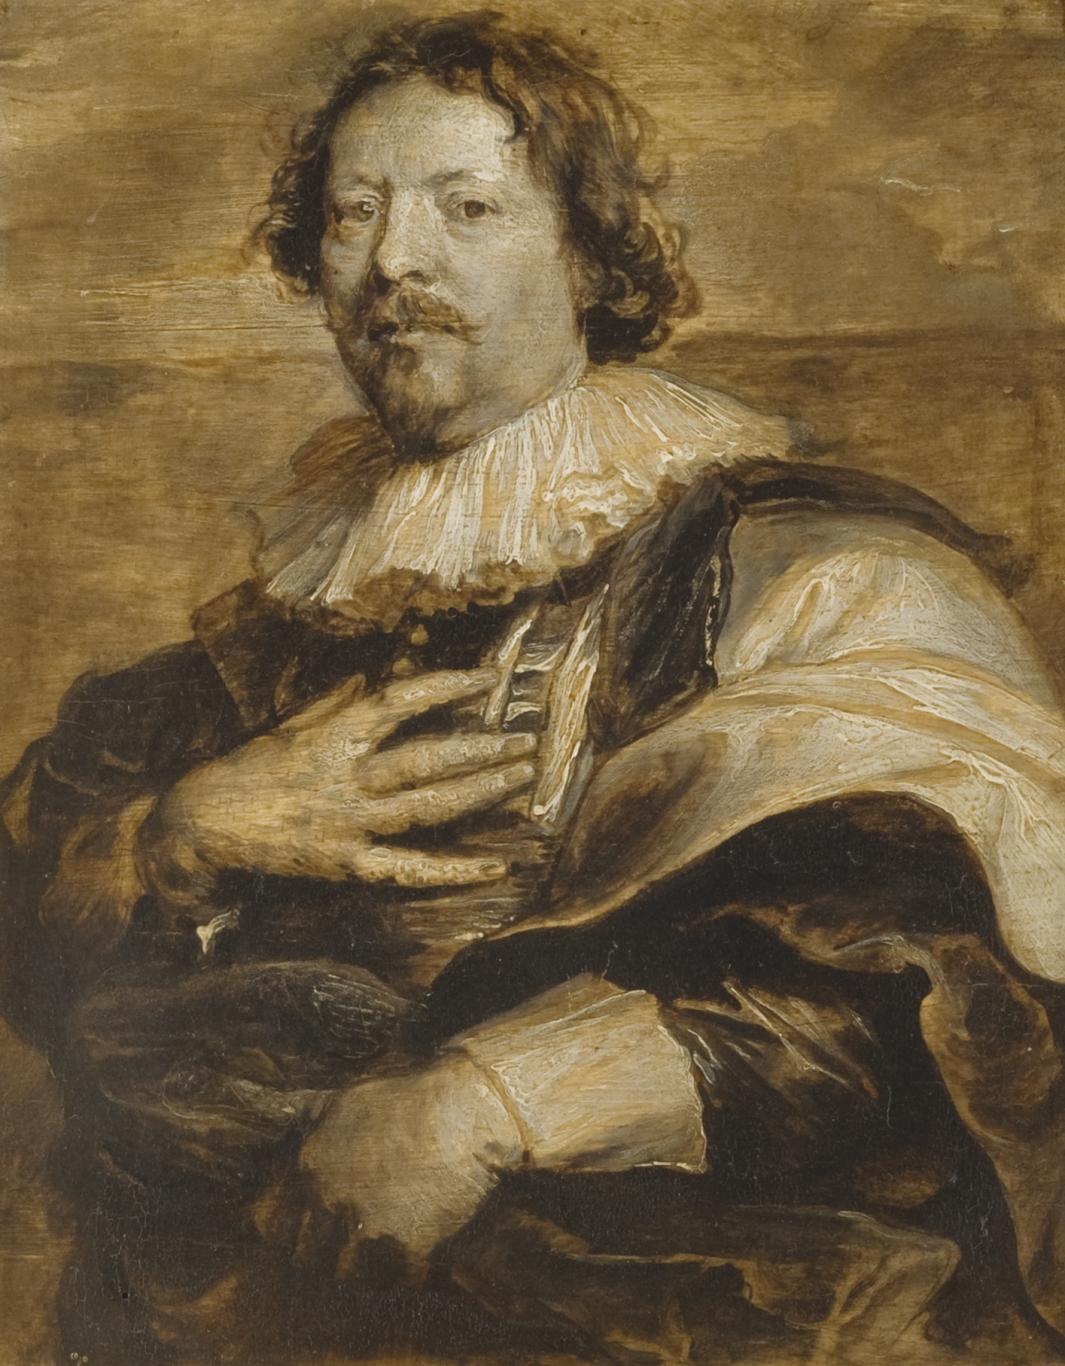 oil painting in brown tones of man wearing cloak and lace collar and bundle in hand